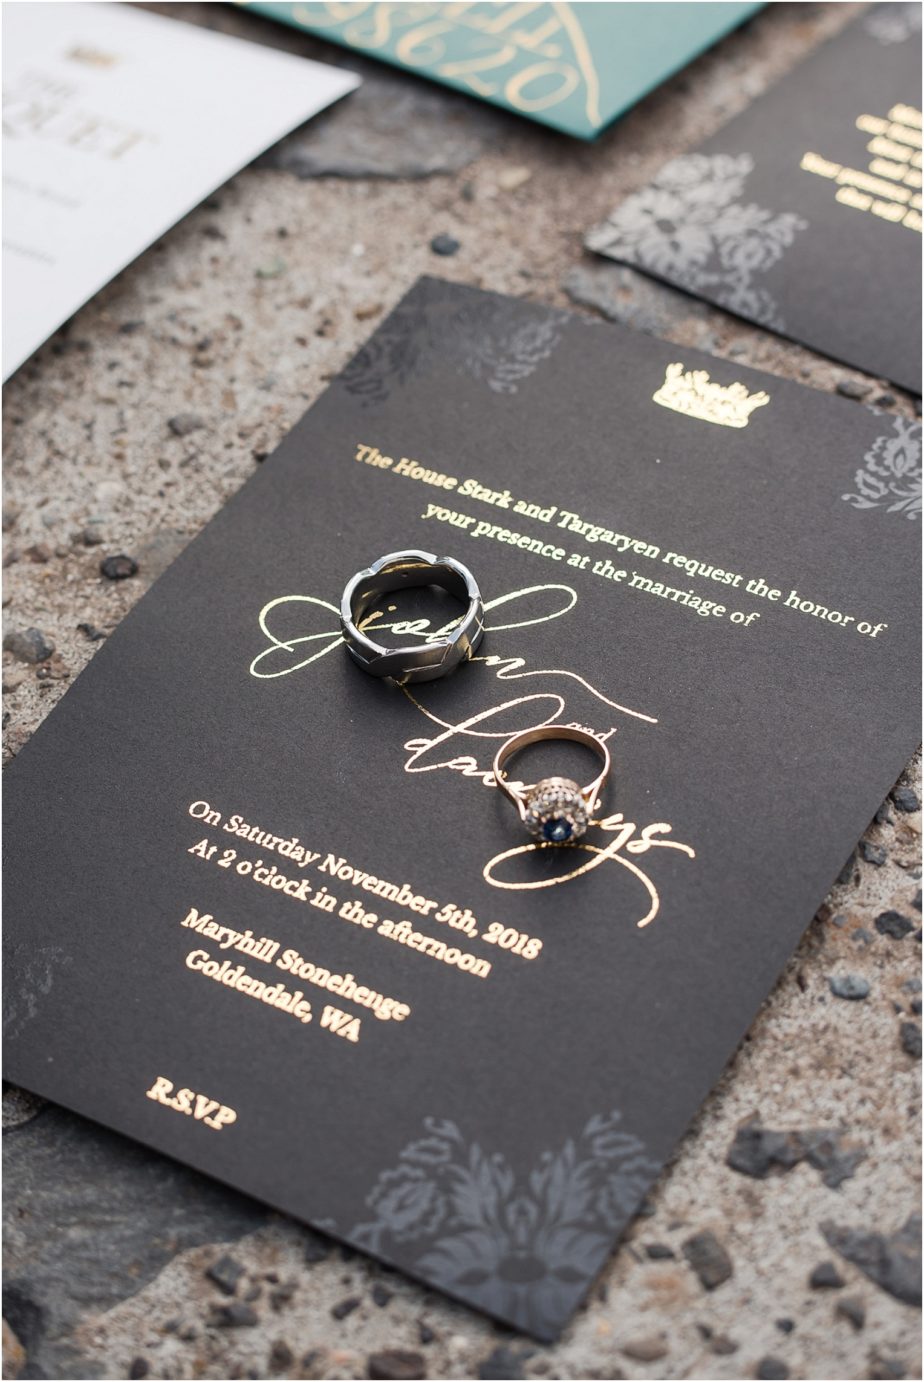 Game of Thrones wedding inspiration Goldendale WA Styled Shoot wedding invitation suite